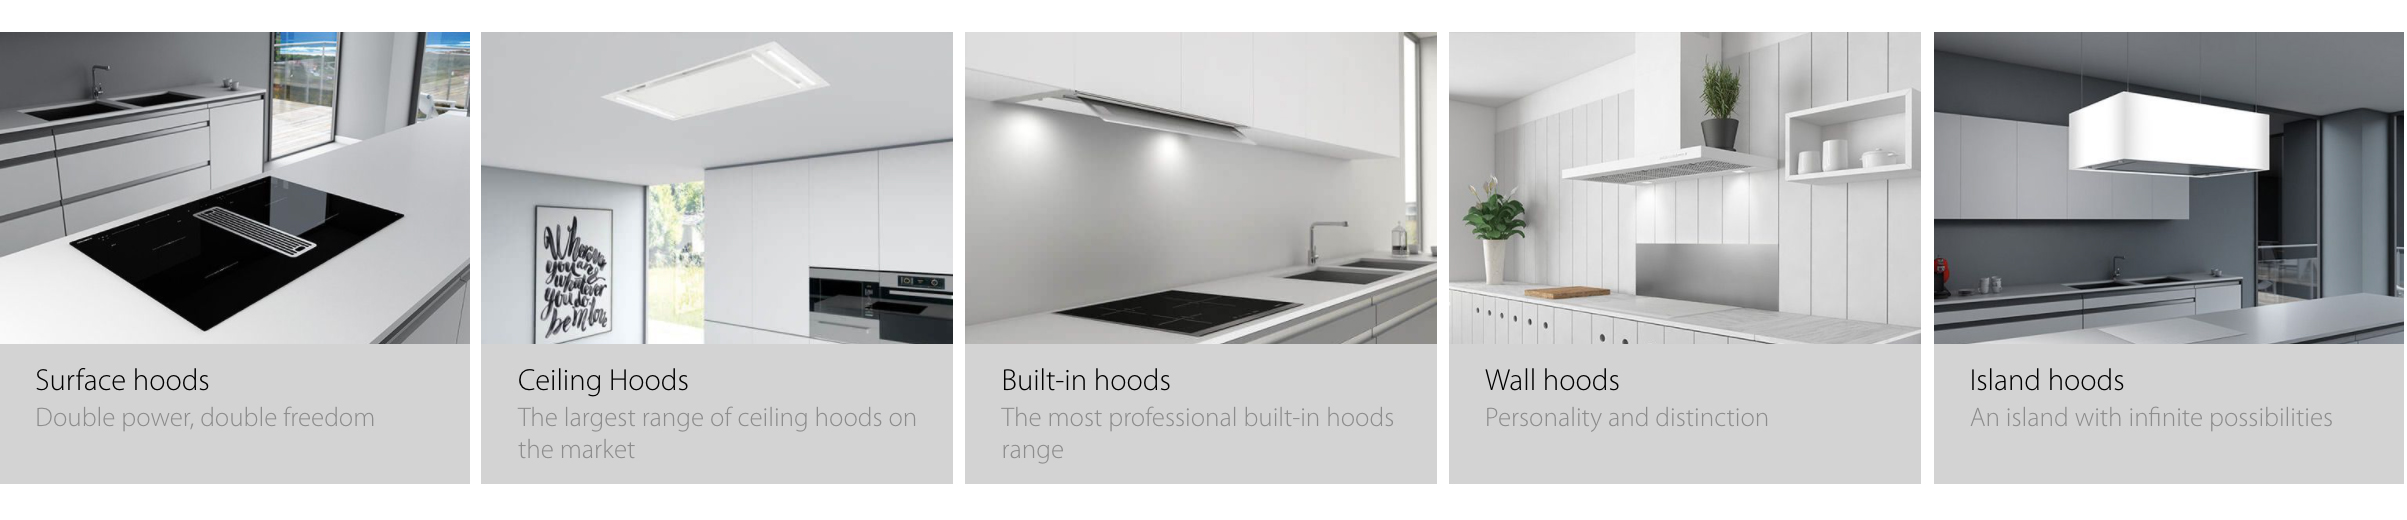 How do I choose the best cooker hood for my kitchen